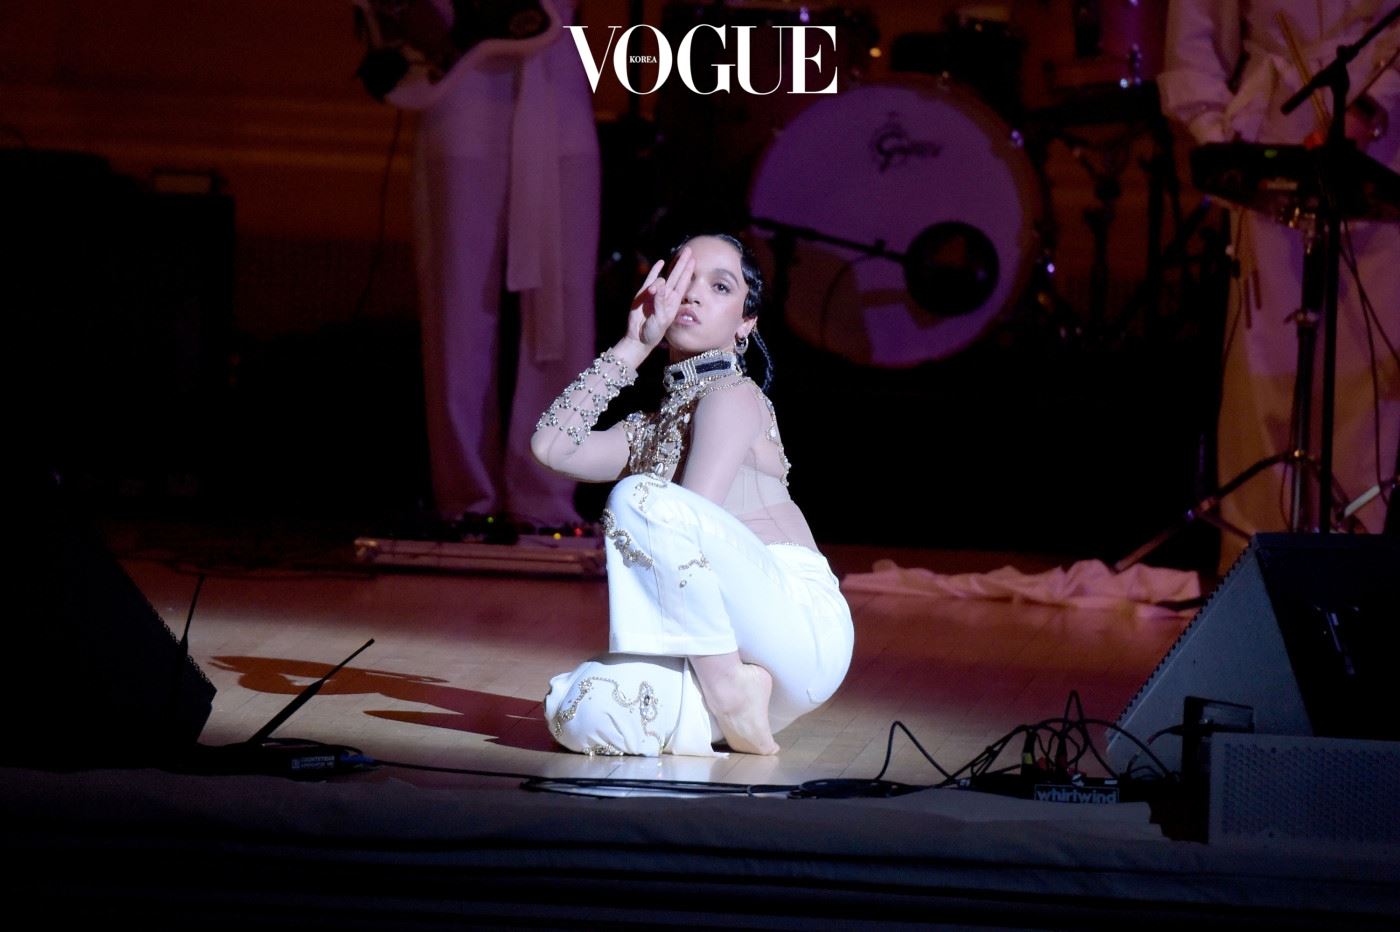 NEW YORK, NY - FEBRUARY 22:  Singer FKA twigs performs onstage at the 26th Annual Tibet House U.S. benefit concert at Carnegie Hall on February 22, 2016 in New York City.  (Photo by Theo Wargo/Getty Images for Tibet House)